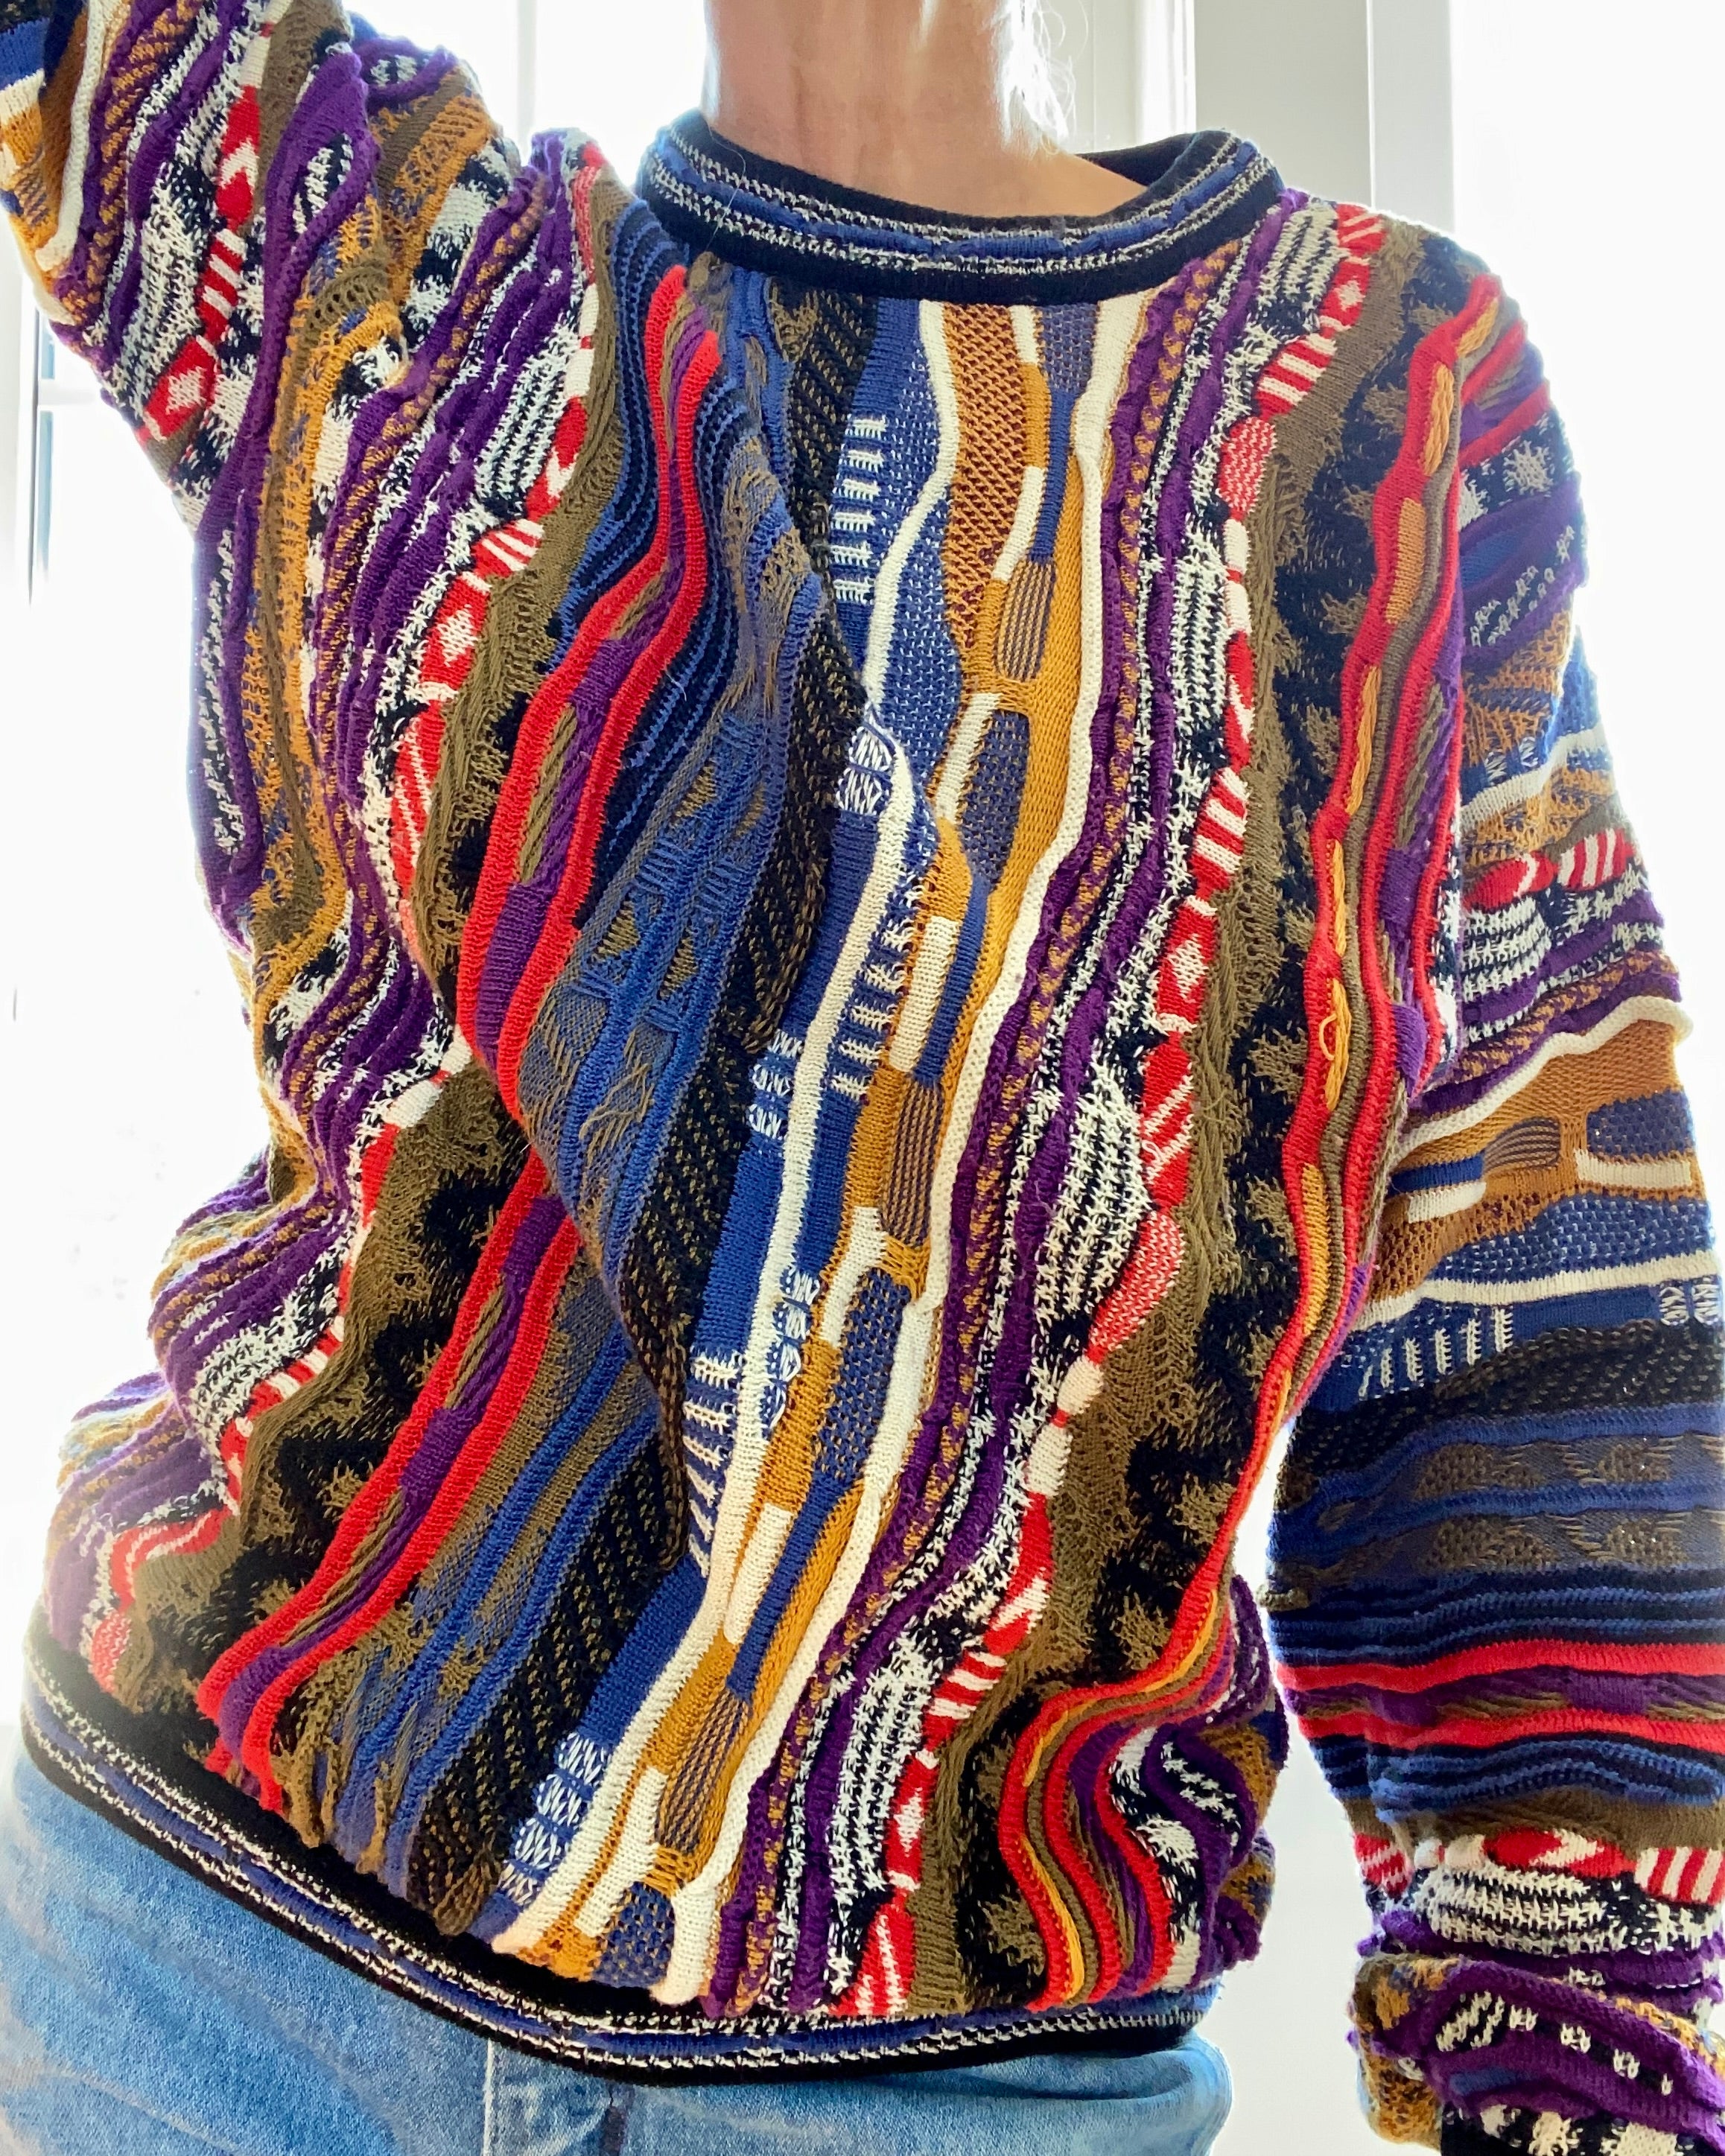 VINTAGE COOGI Inspired Jacquard Sweater by TUNDRA